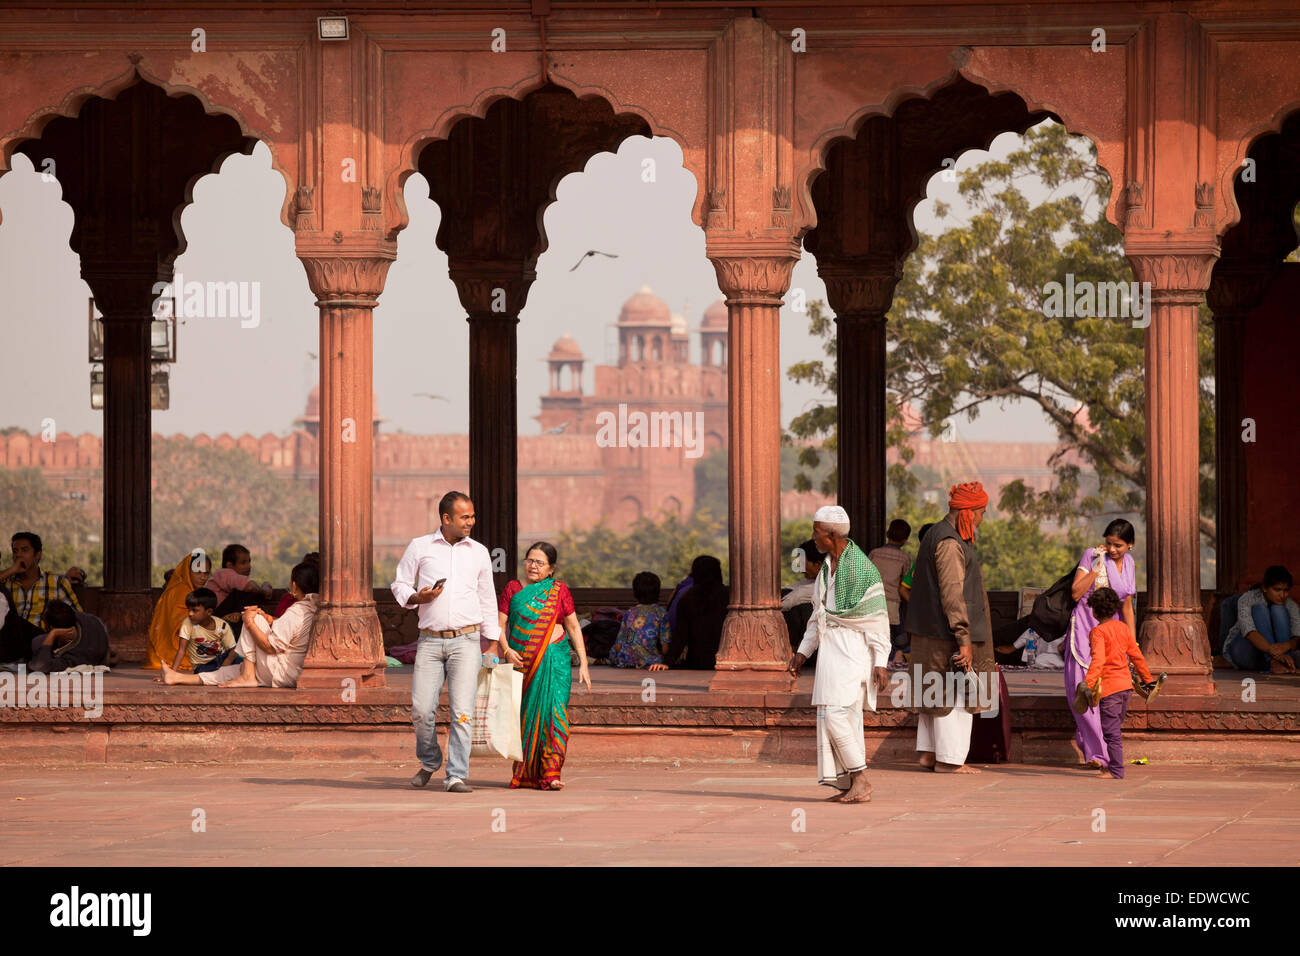 Colonnade in the courtyard of the Friday Mosque Jama Masjid, the Red Fort at the back, Delhi, India, Asia Stock Photo